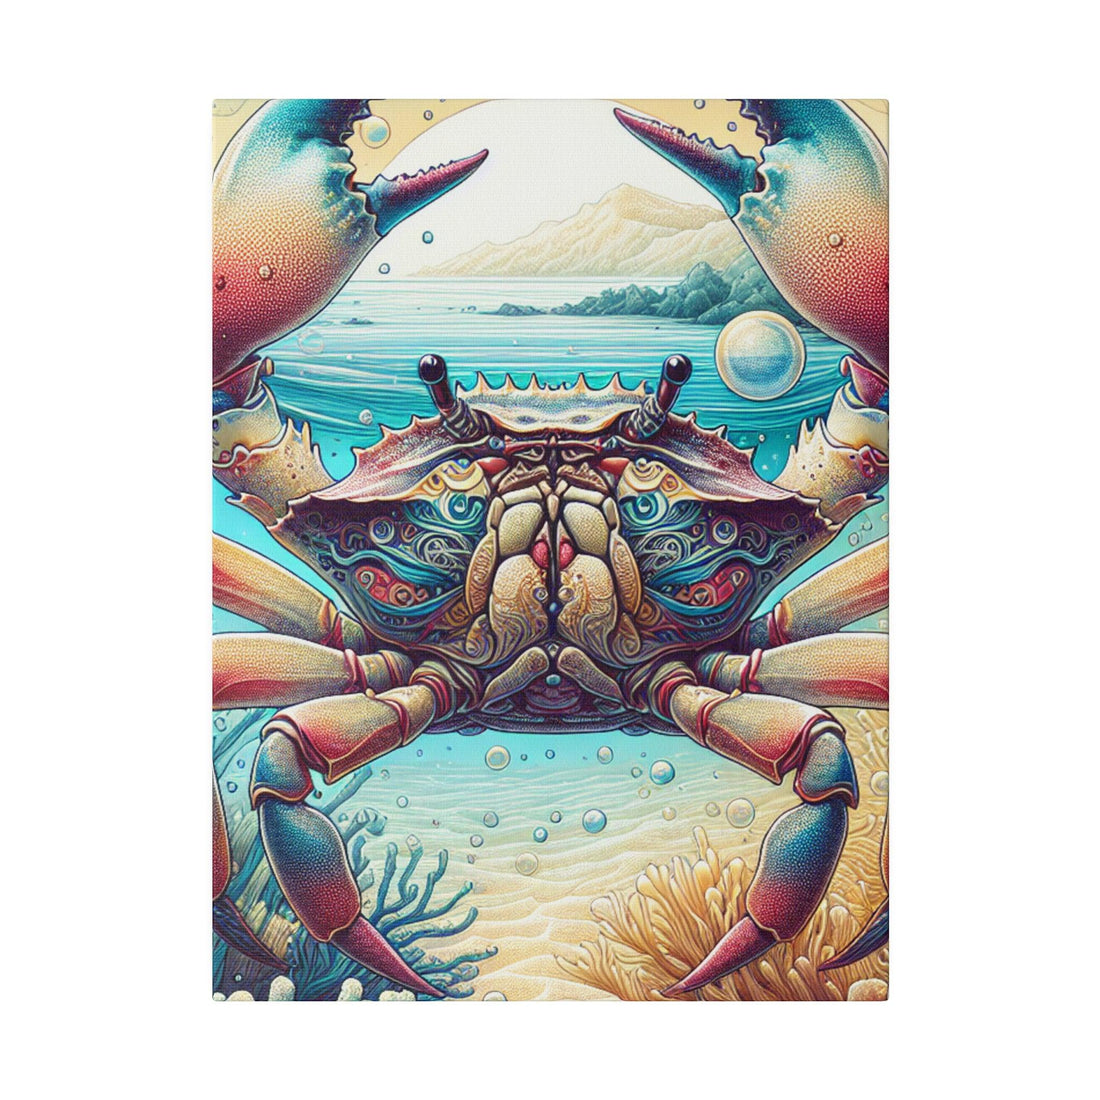 "Crabtacular Tranquility Canvas Wall Art" - Canvas - The Alice Gallery